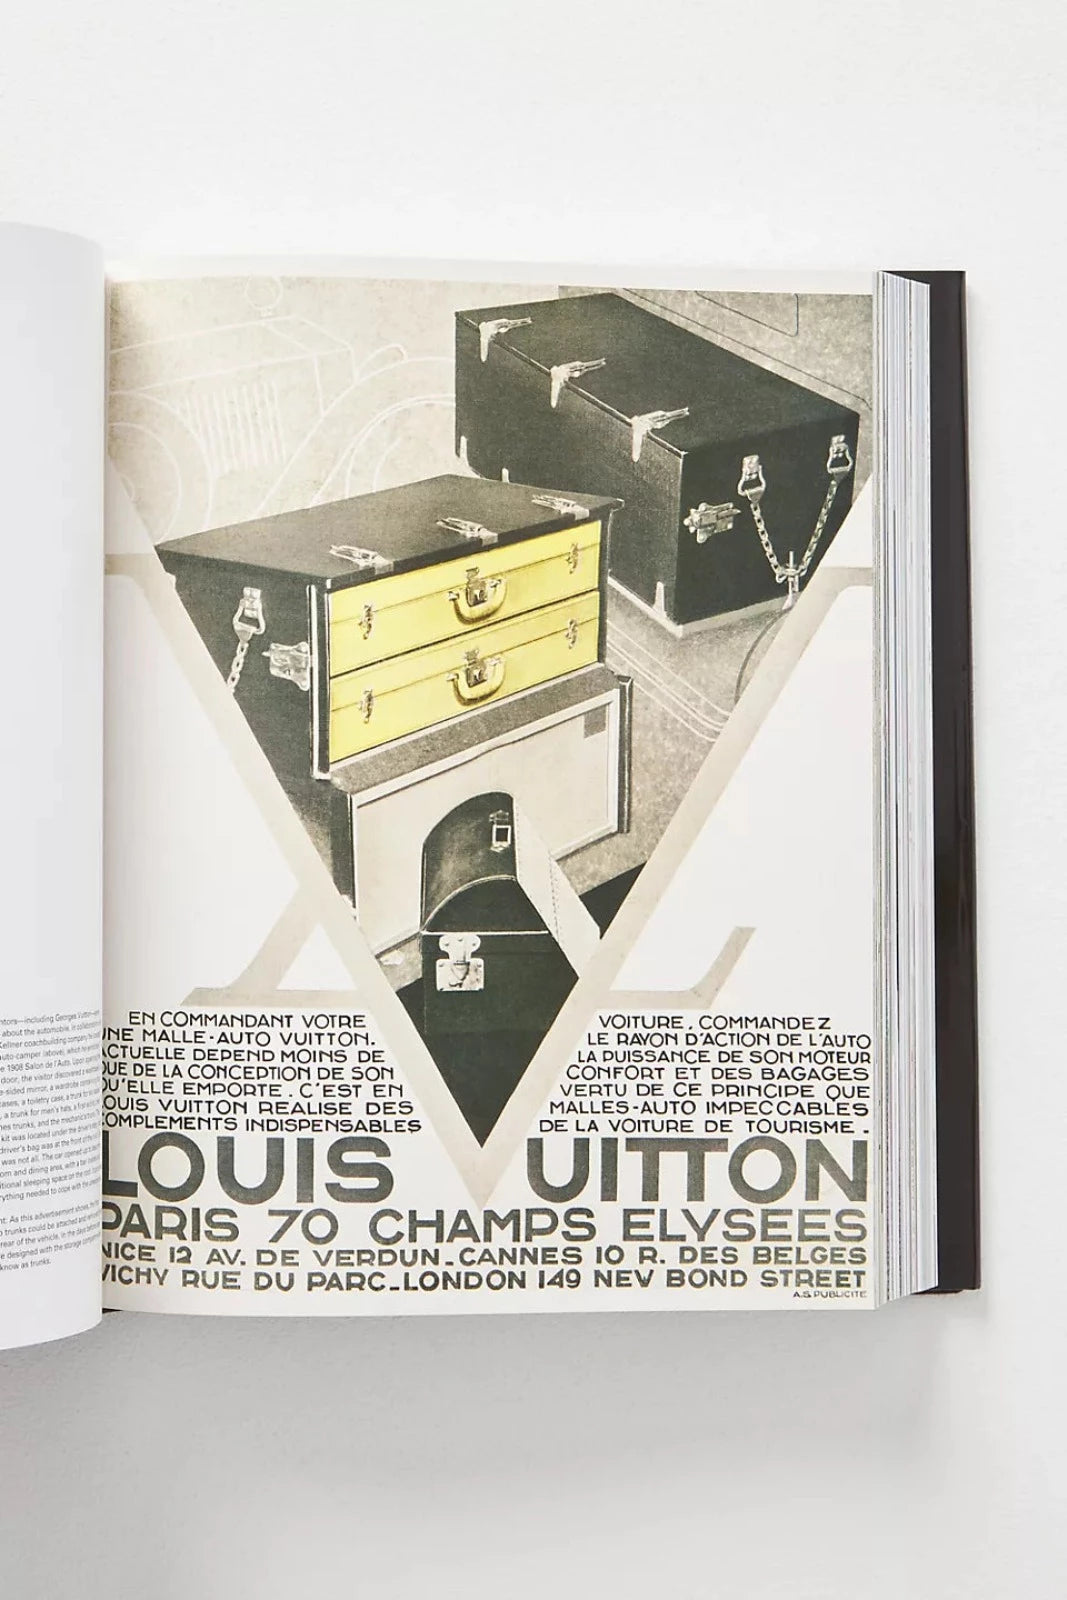 SHOP Louis Vuitton  Cannes Designer Art Print or Poster From